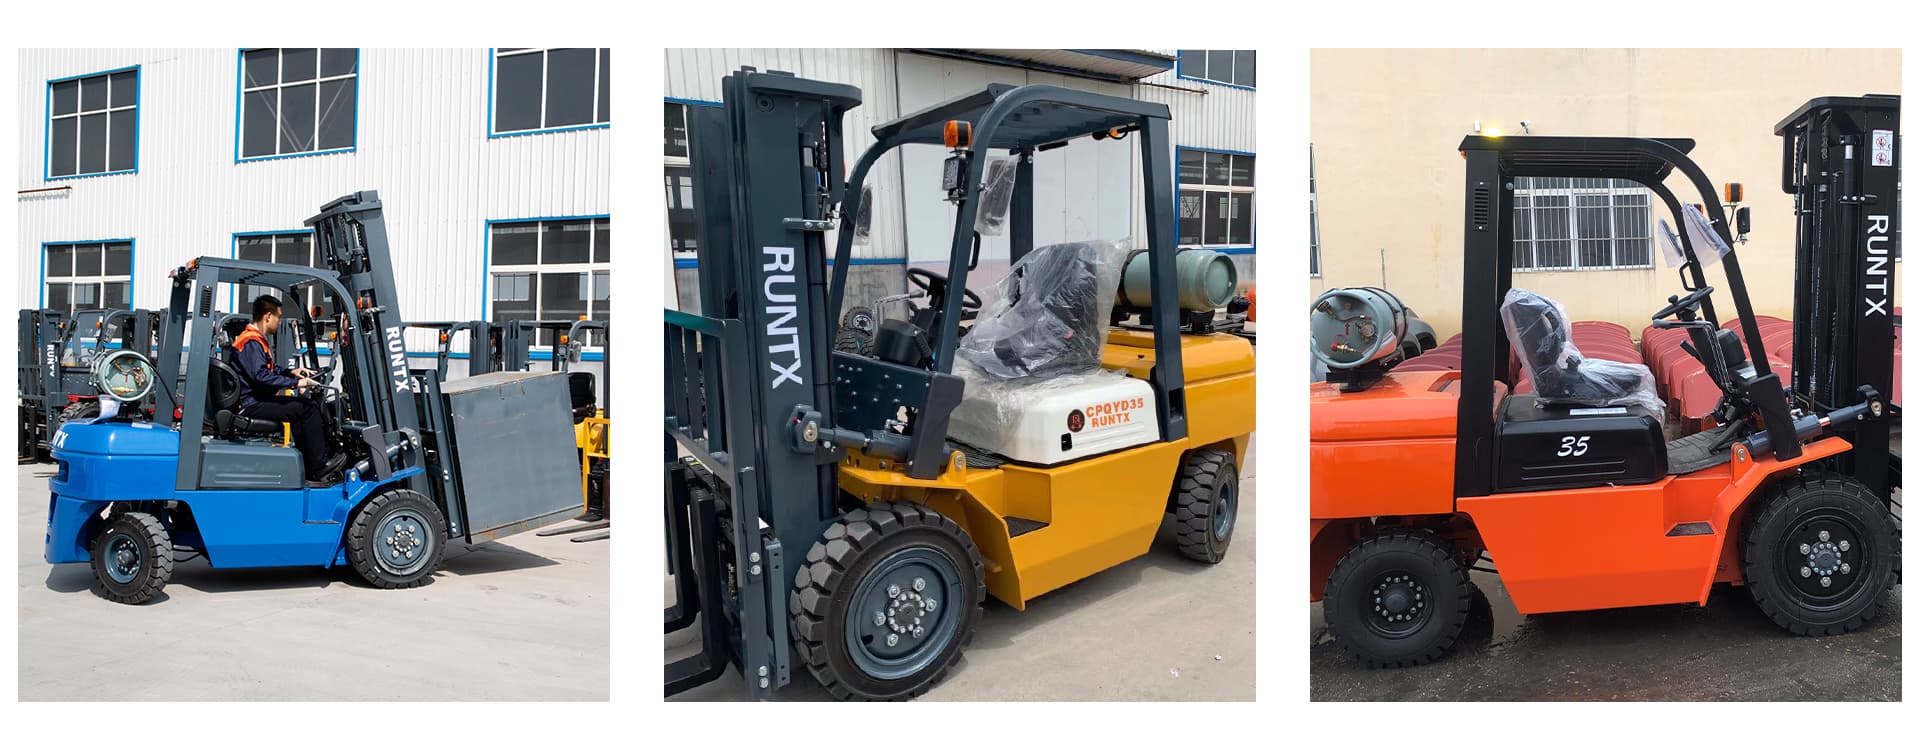 Runtx provide free OEM services about forklift